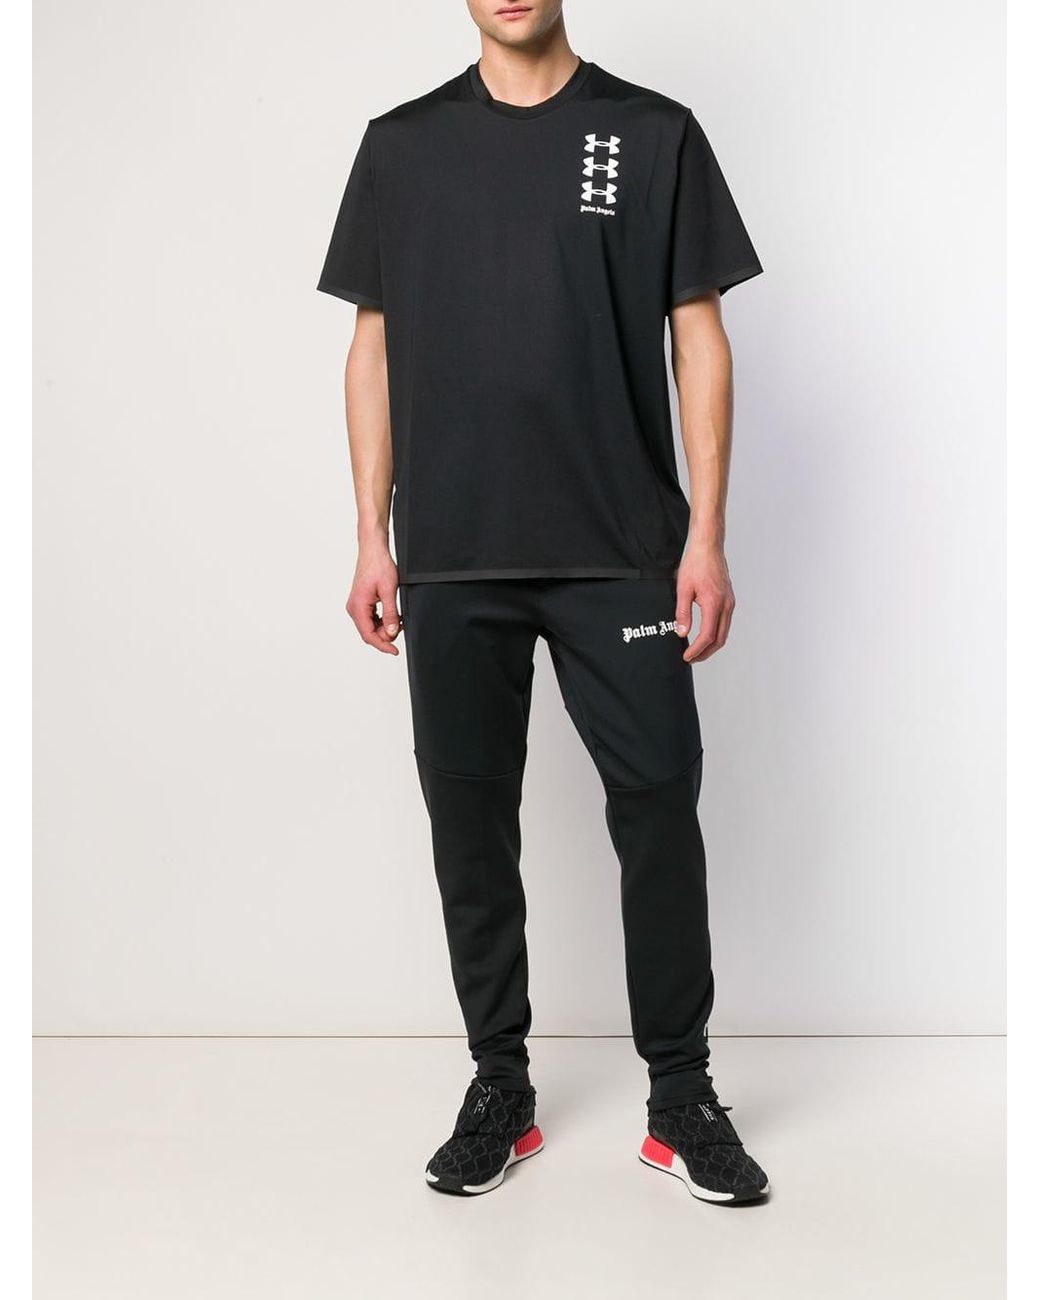 abstraktion agitation Stirre Palm Angels X Under Armour Recovery T-shirt in Black for Men | Lyst